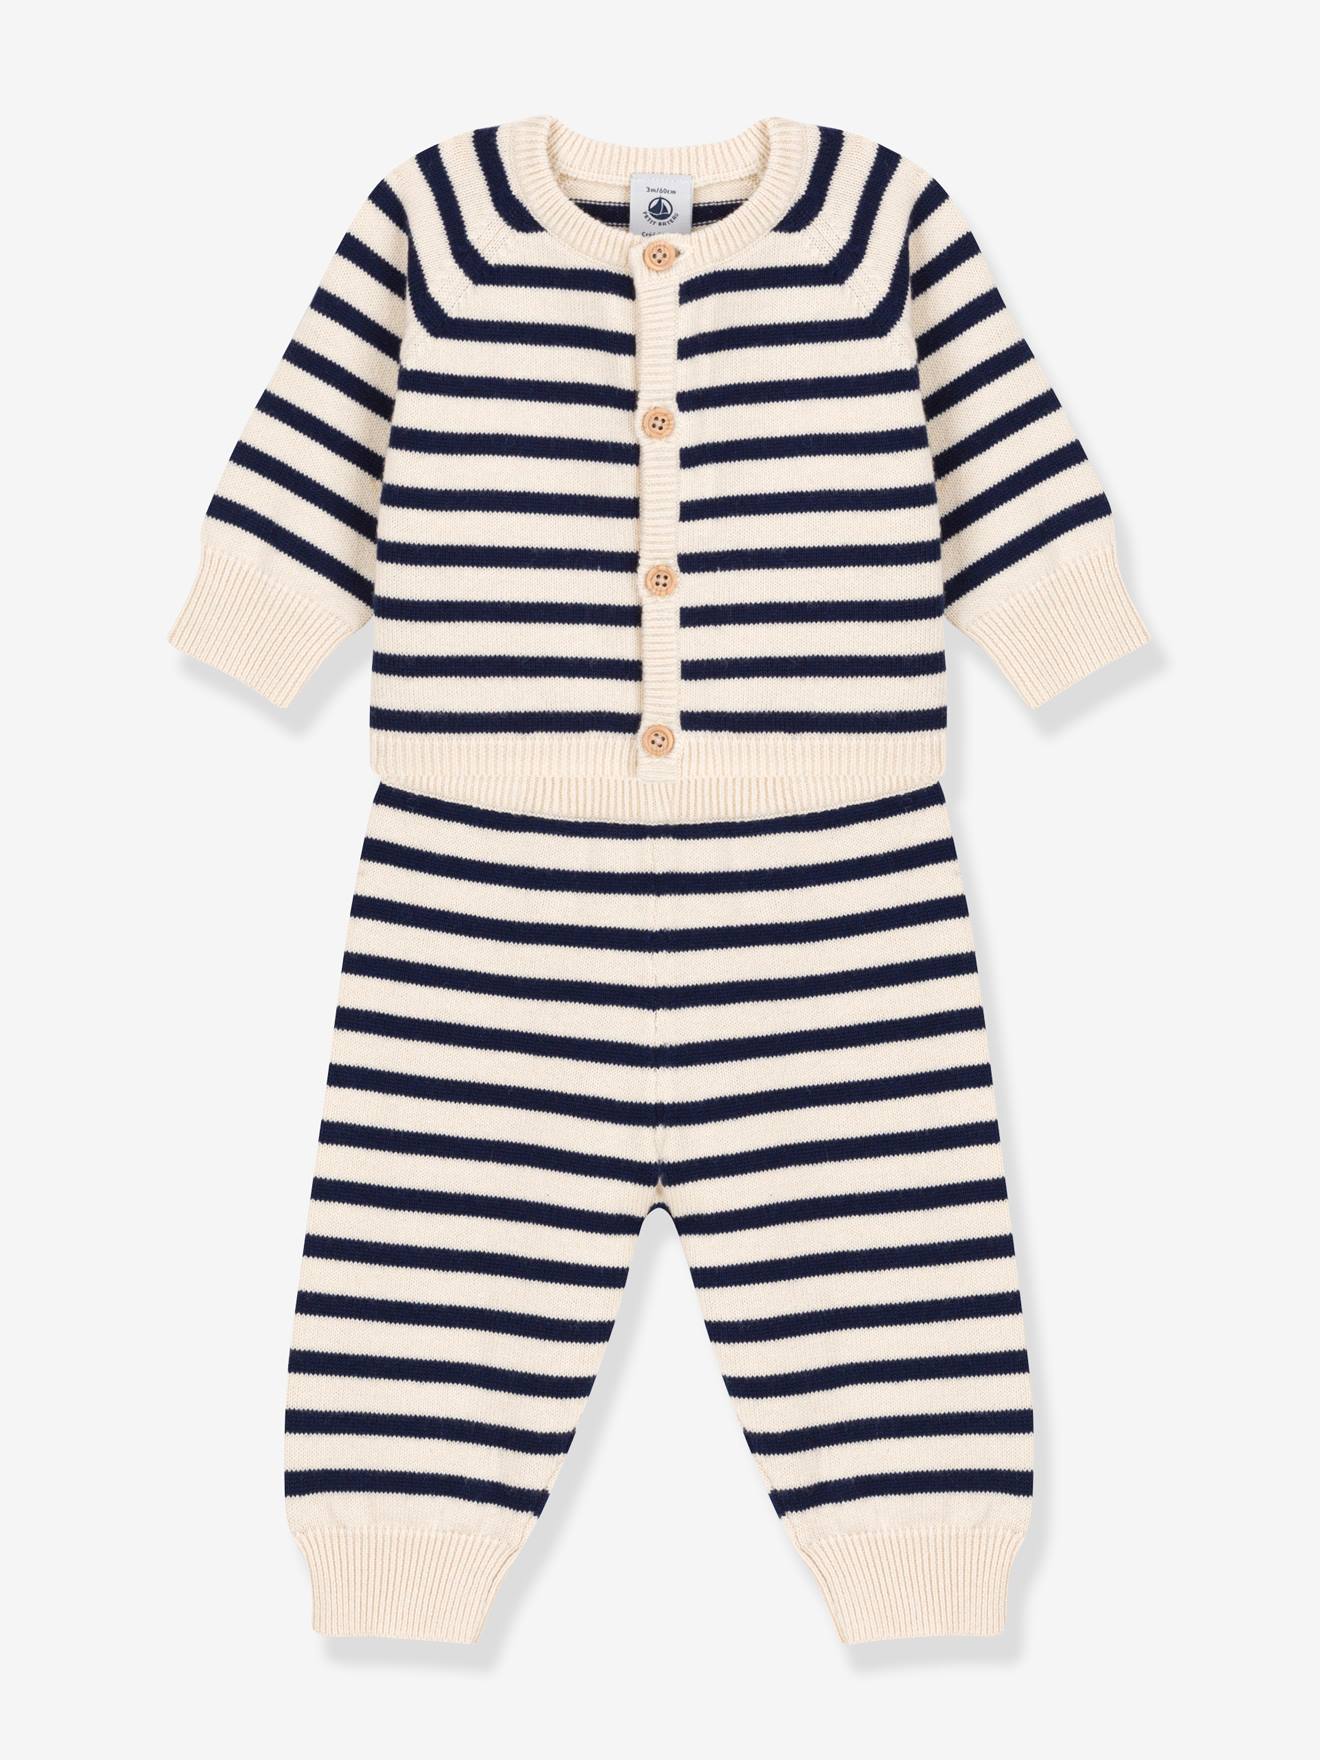 Striped 2-Piece Set for Babies, in Wool & Cotton Knit, by Petit Bateau printed white